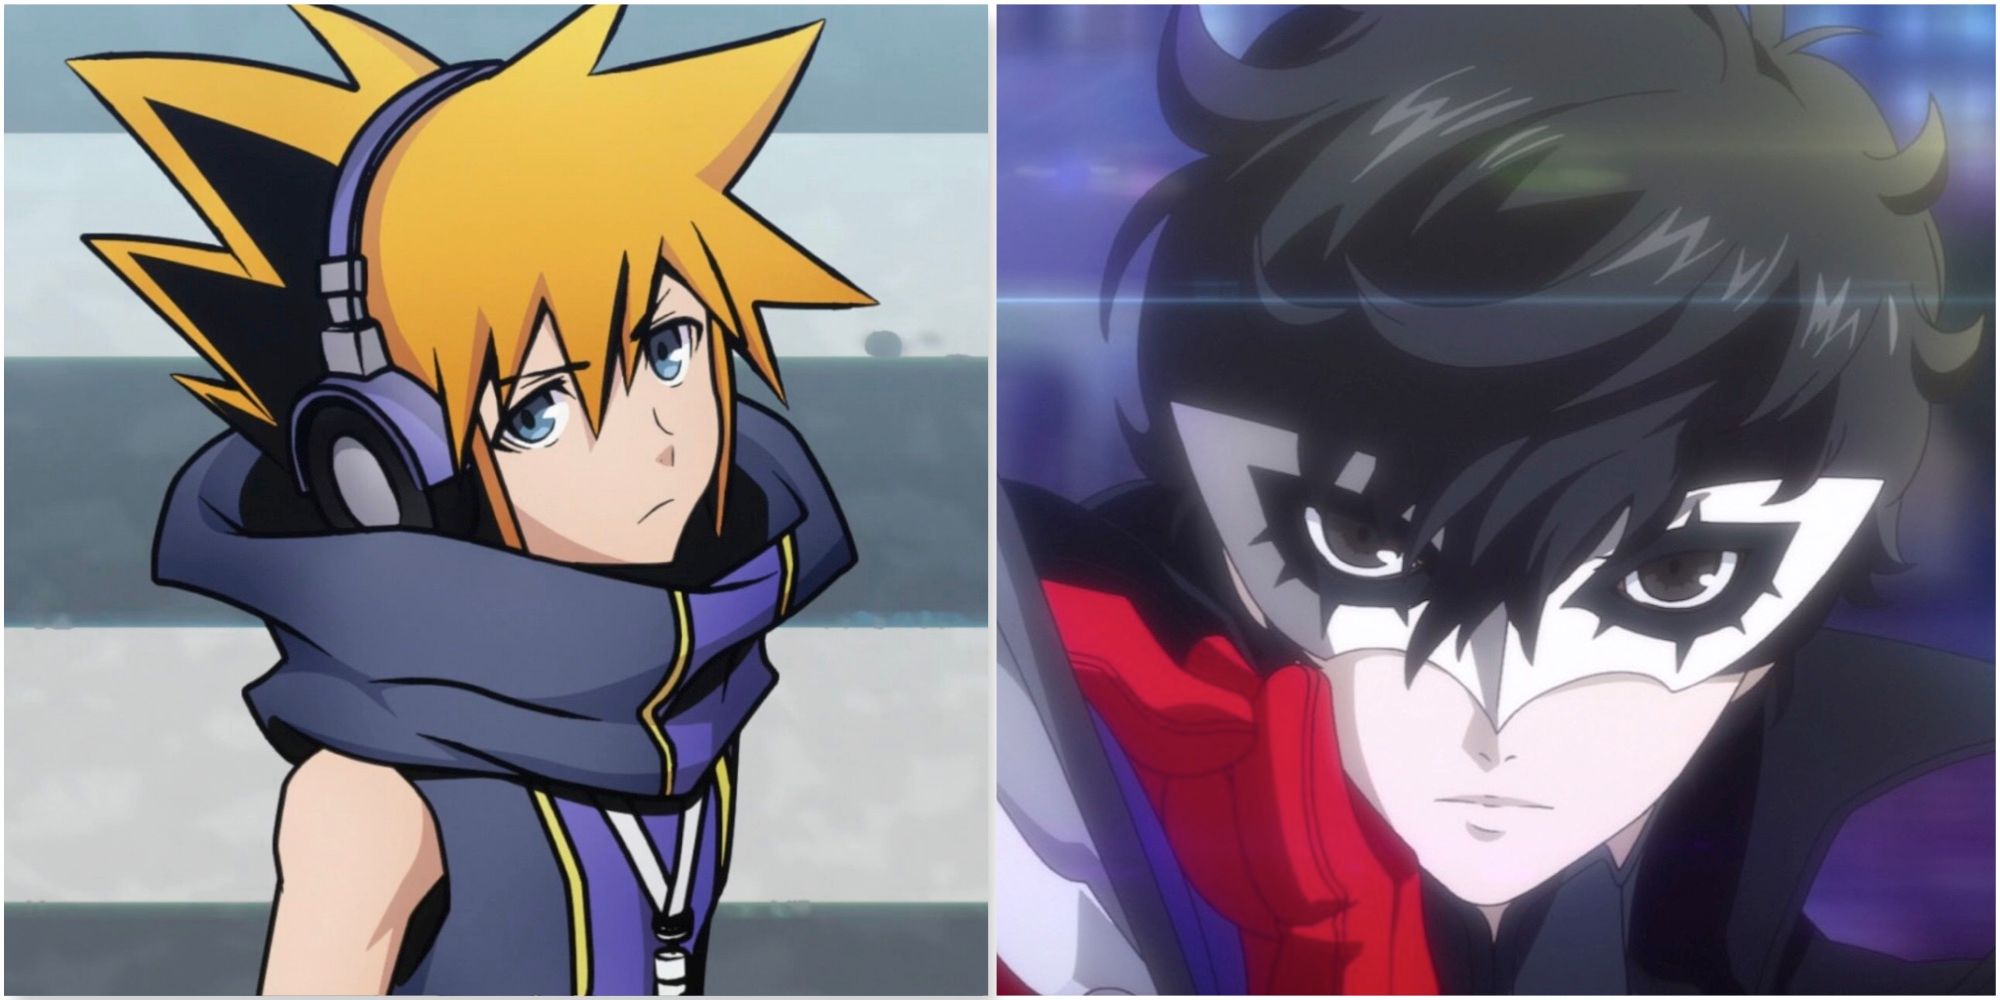 Neku in The World Ends With You and Joker in Persona 5 Strikers